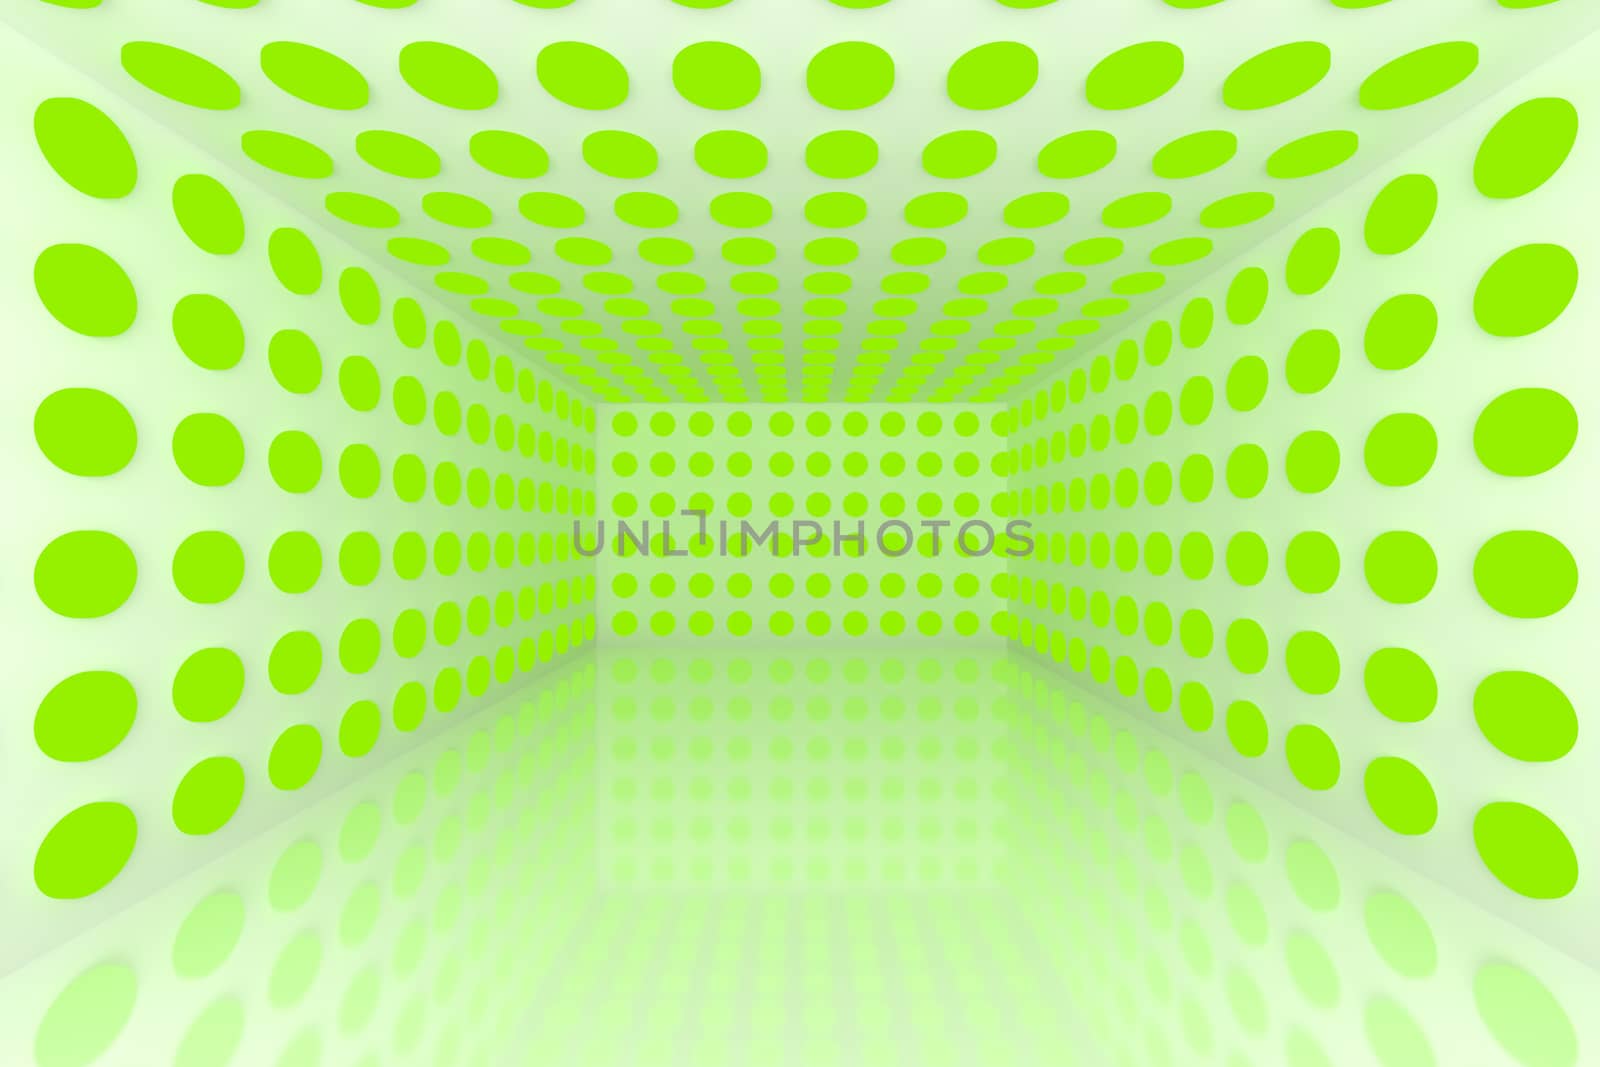 Empty room with abstract color green lighting sphere